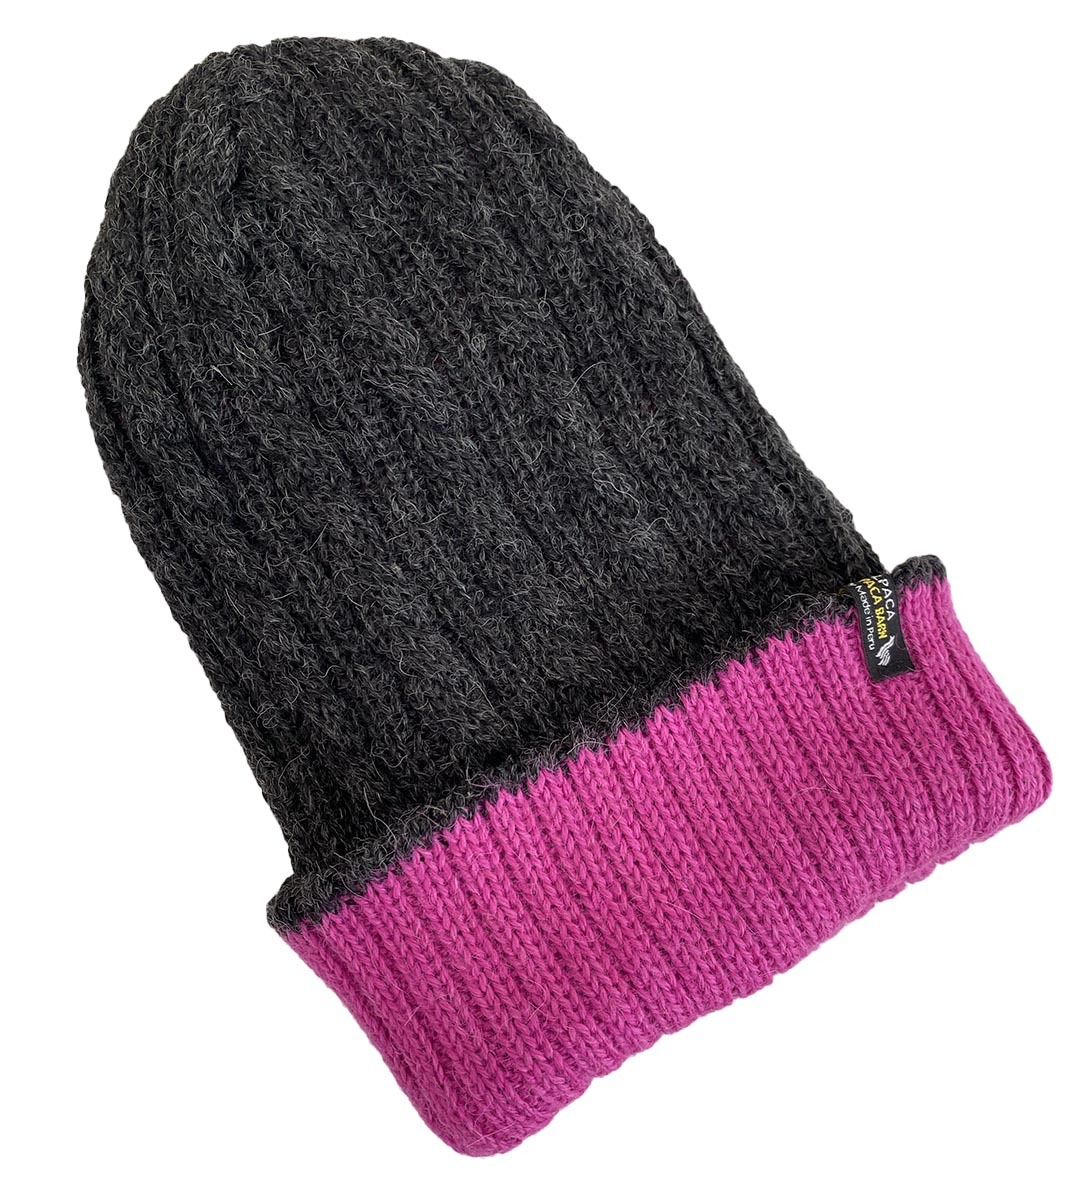 Reversible Hand Knit Alpaca Beanie Hot - Pink/Charcoal - 2